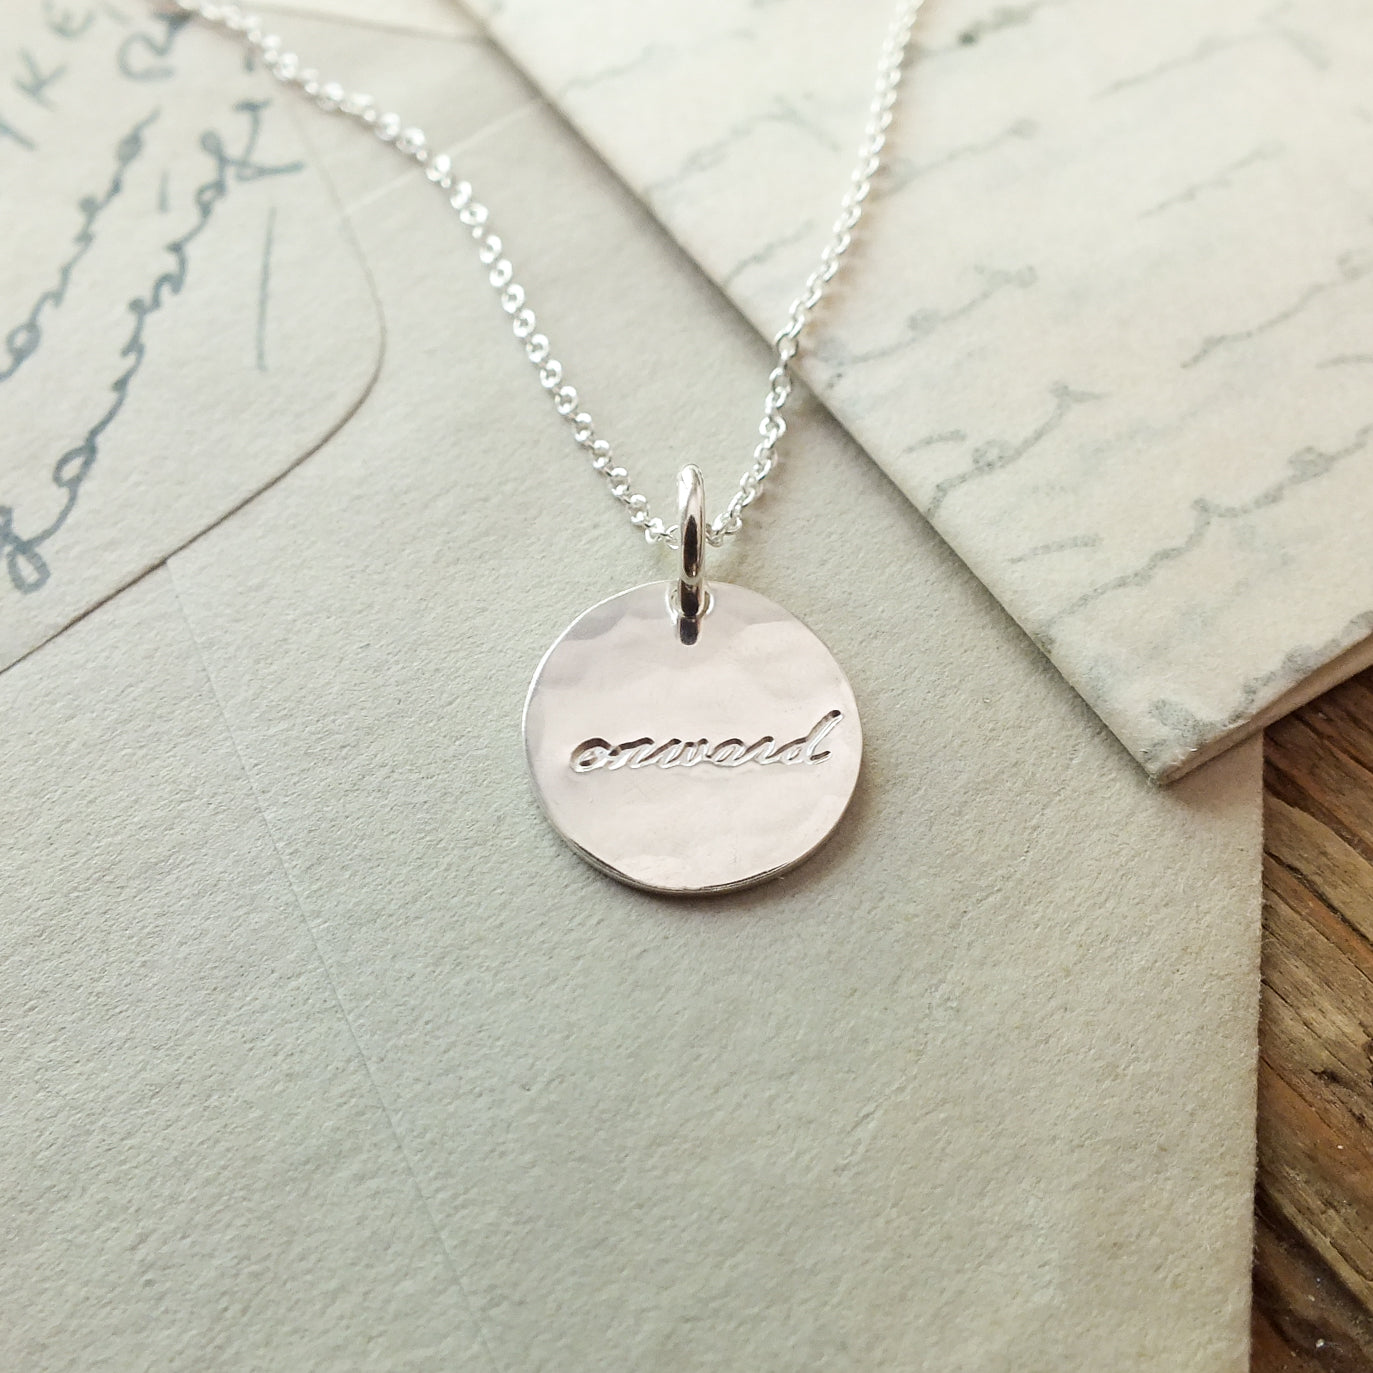 A Becoming Jewelry Onward Necklace with the word &quot;onward&quot; engraved on it, displayed on a piece of paper with cursive handwriting.